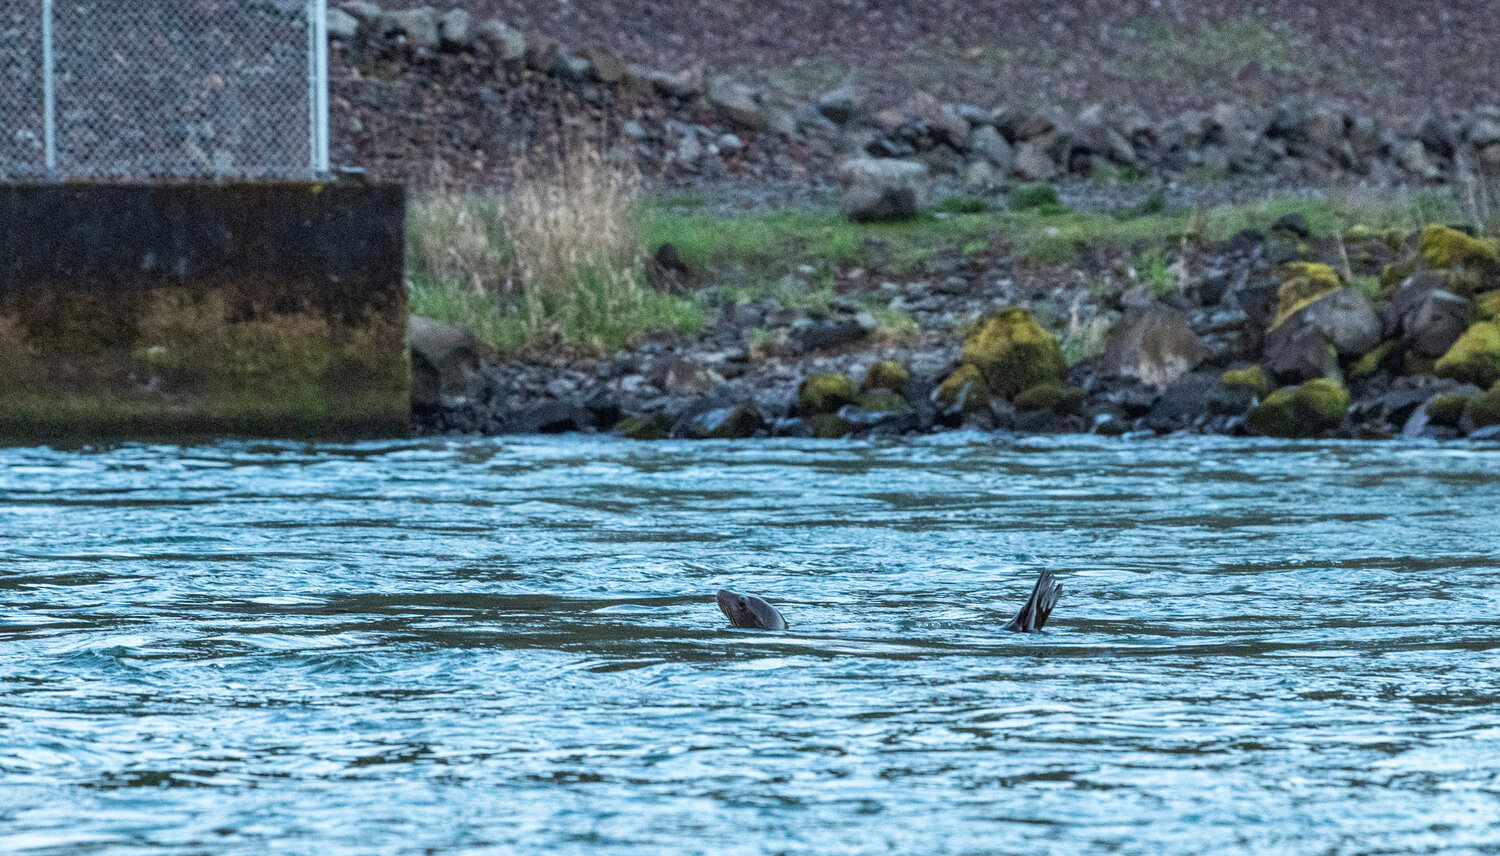 A sea lion rests on rocks near the Barrier Dam after spending the day gorging on hatchery salmon about 70 miles upstream of the Columbia River.